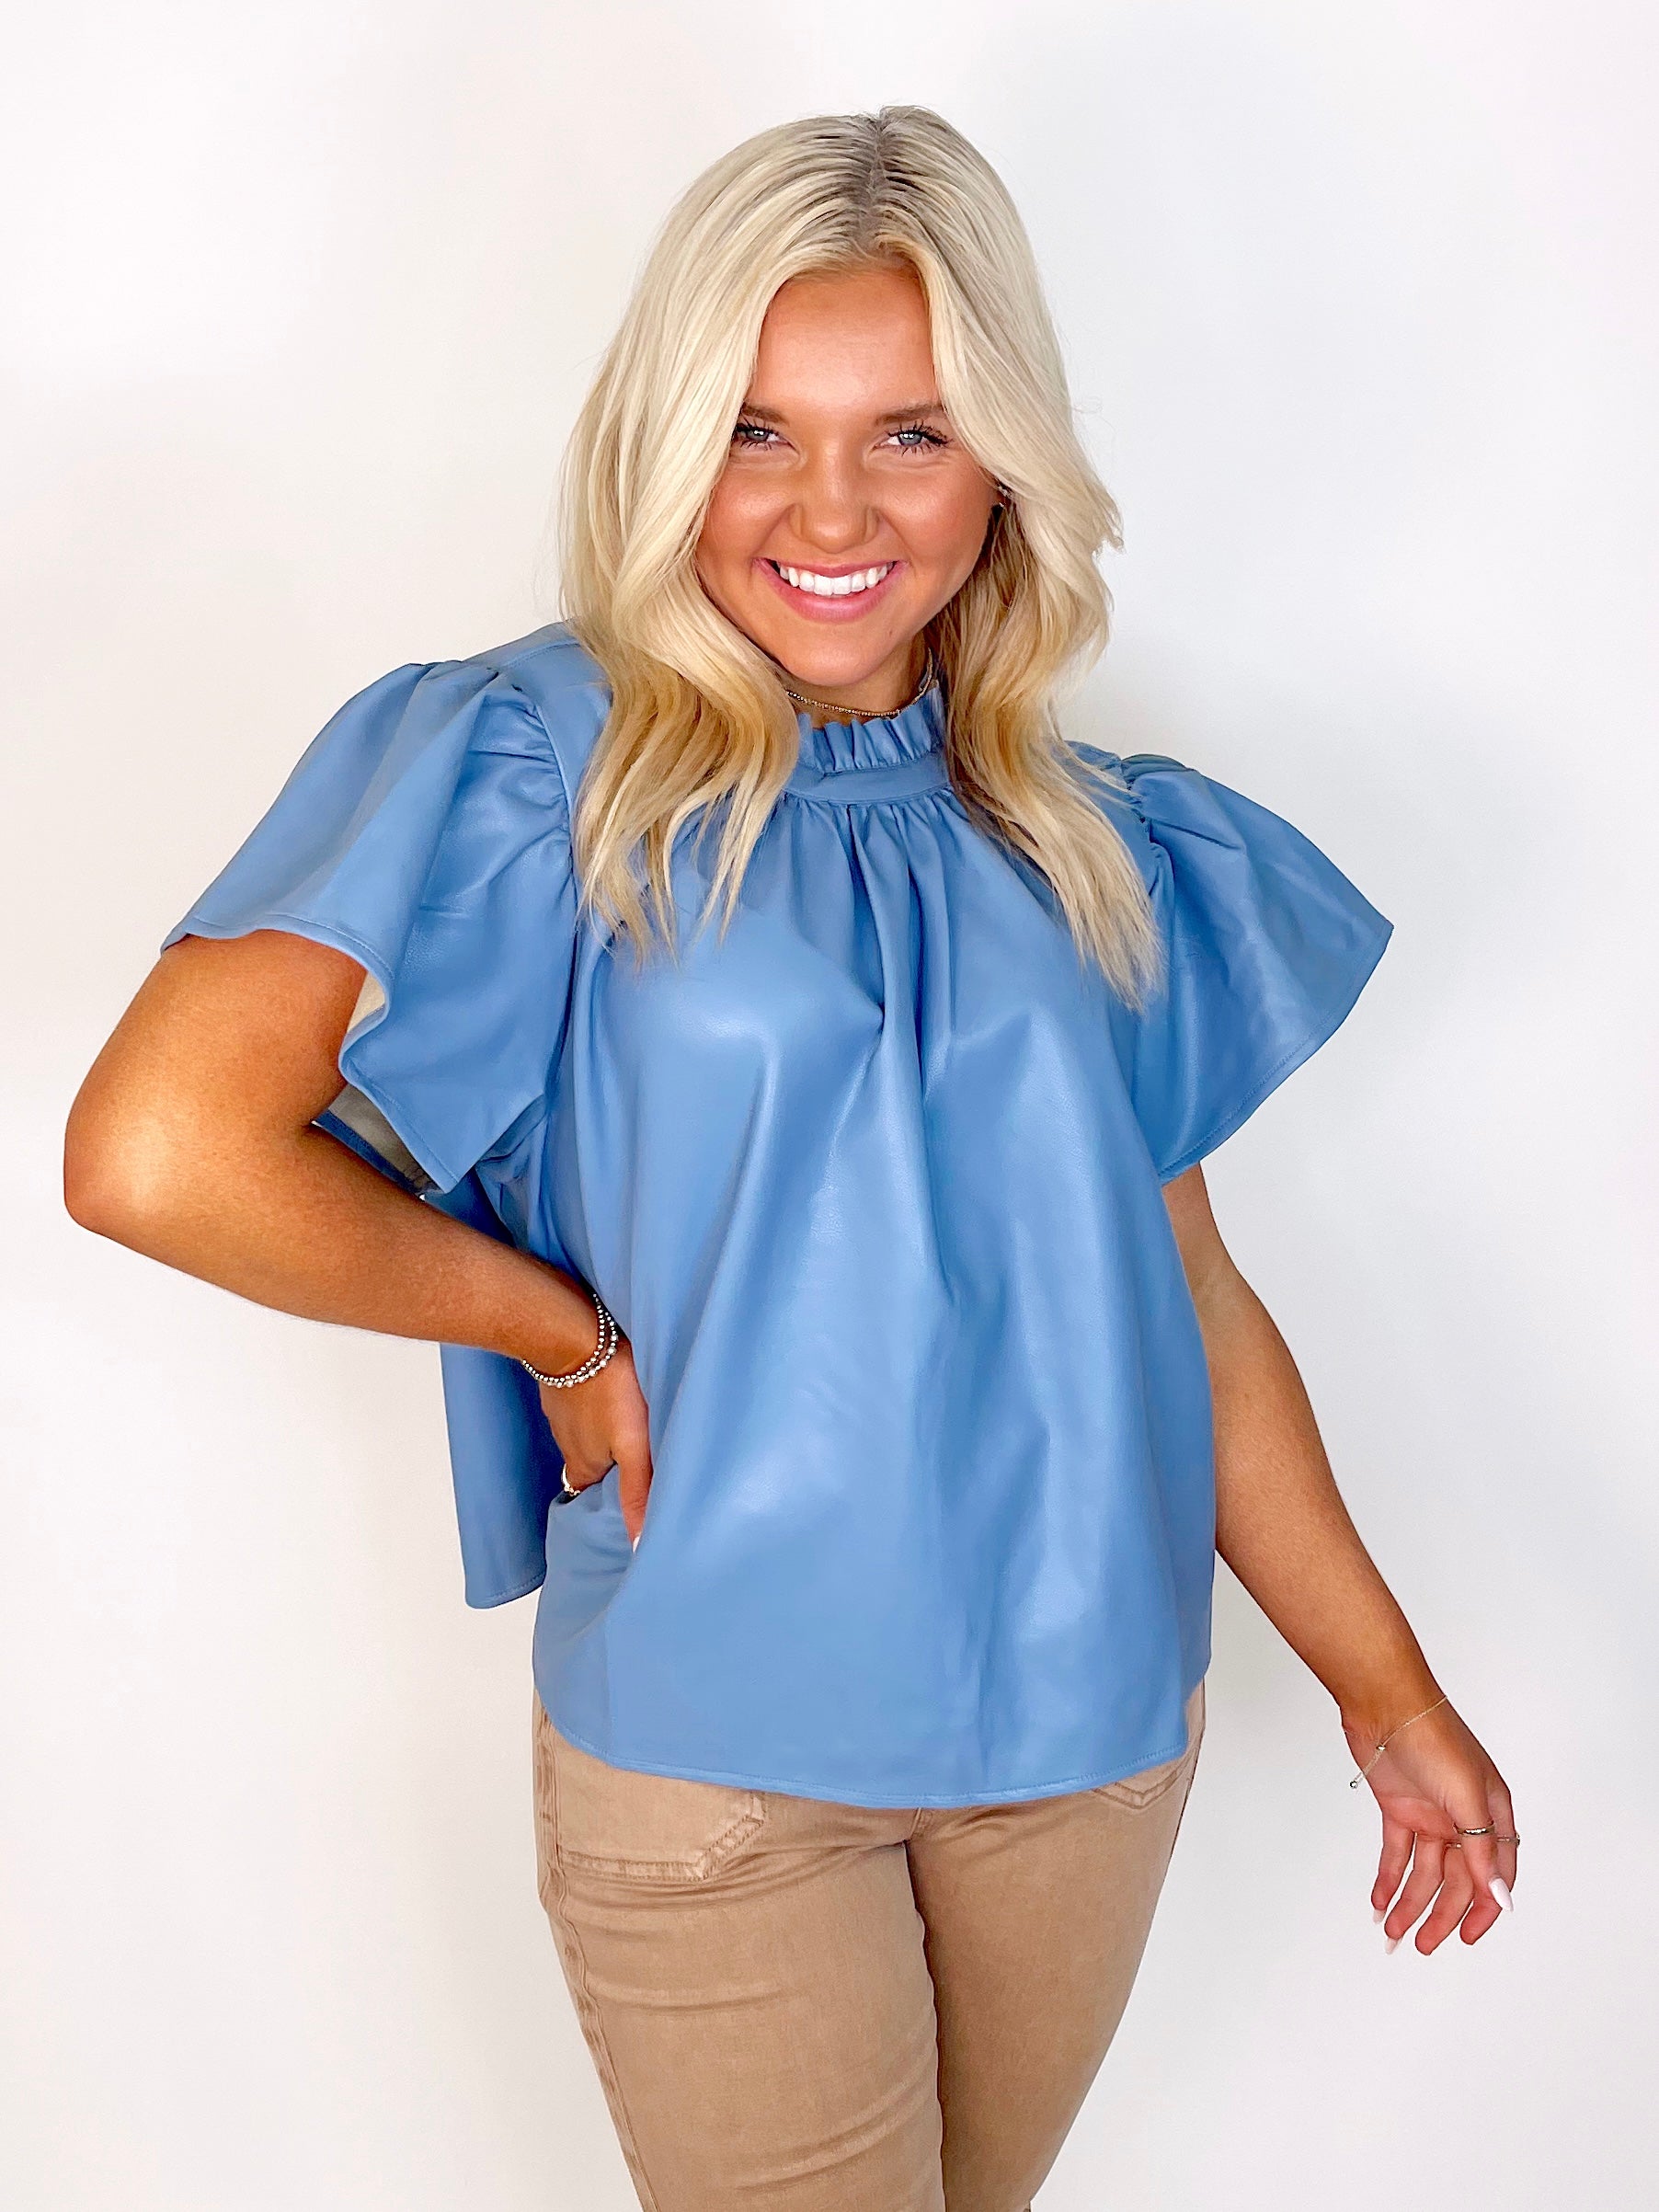 The Harlow Leather Top-Short Sleeves-THML-The Village Shoppe, Women’s Fashion Boutique, Shop Online and In Store - Located in Muscle Shoals, AL.